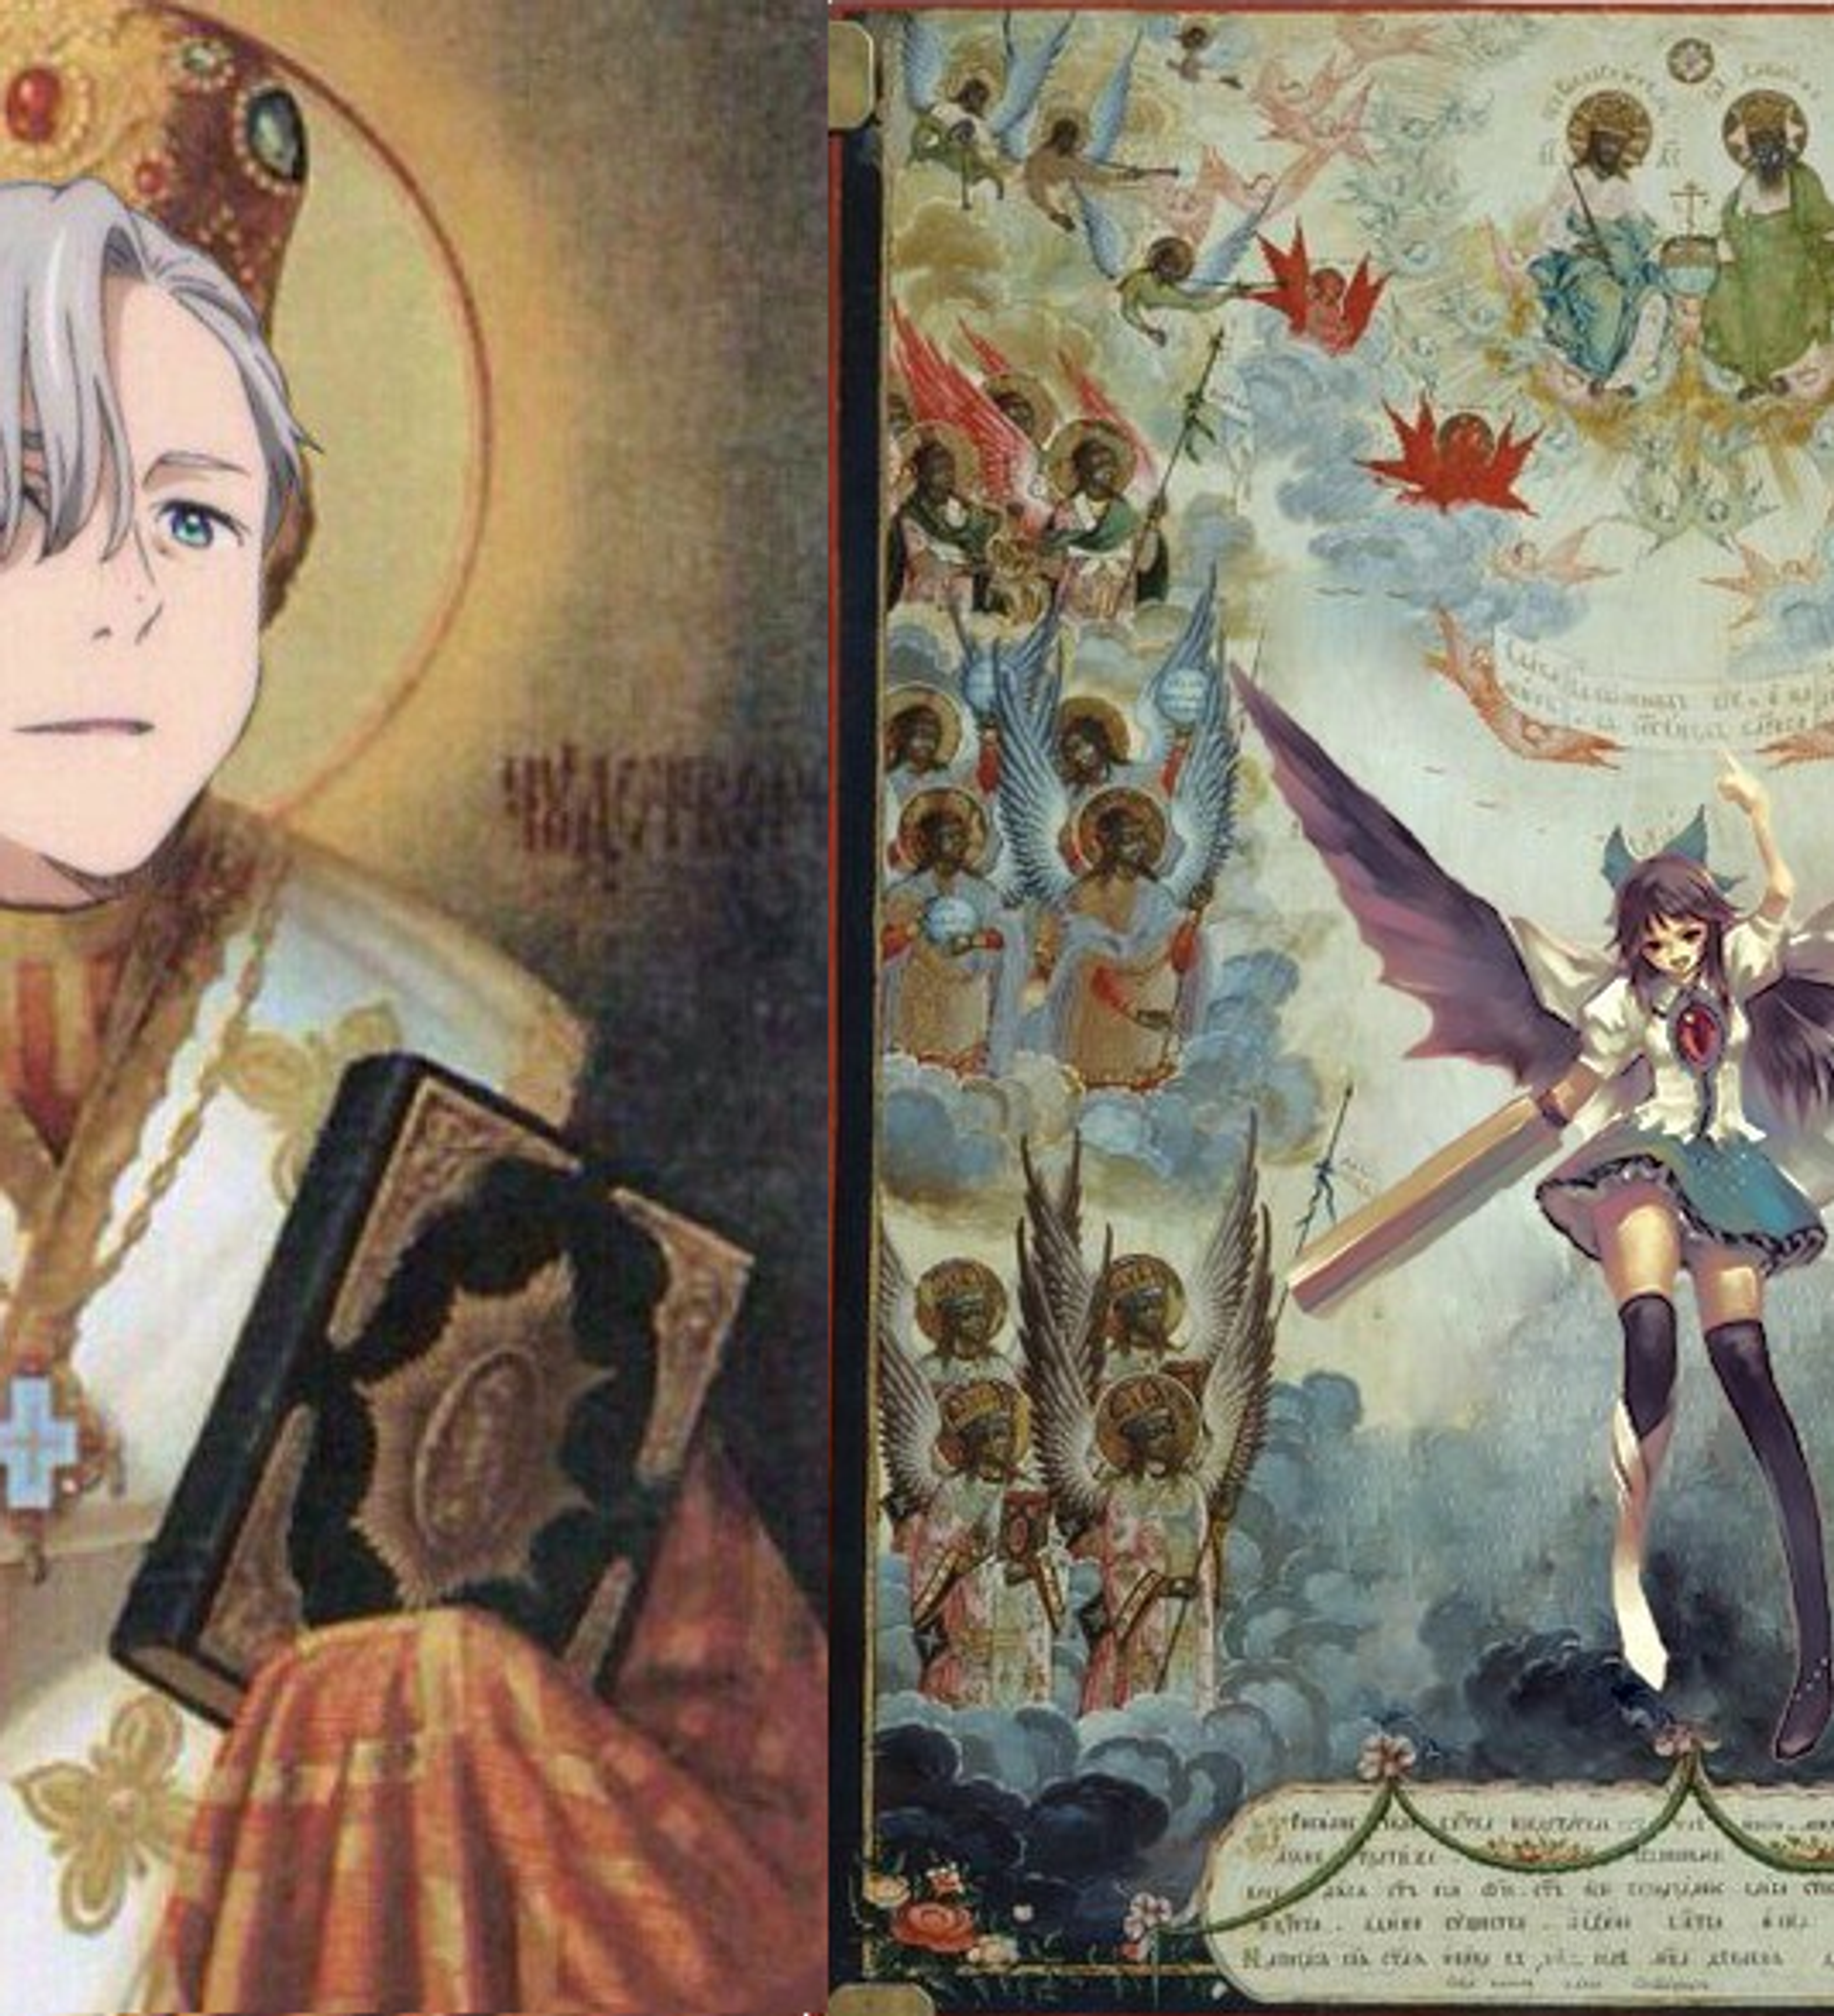 Anime-Style Religious Icons Cause Stir in Russian Region - The Moscow Times